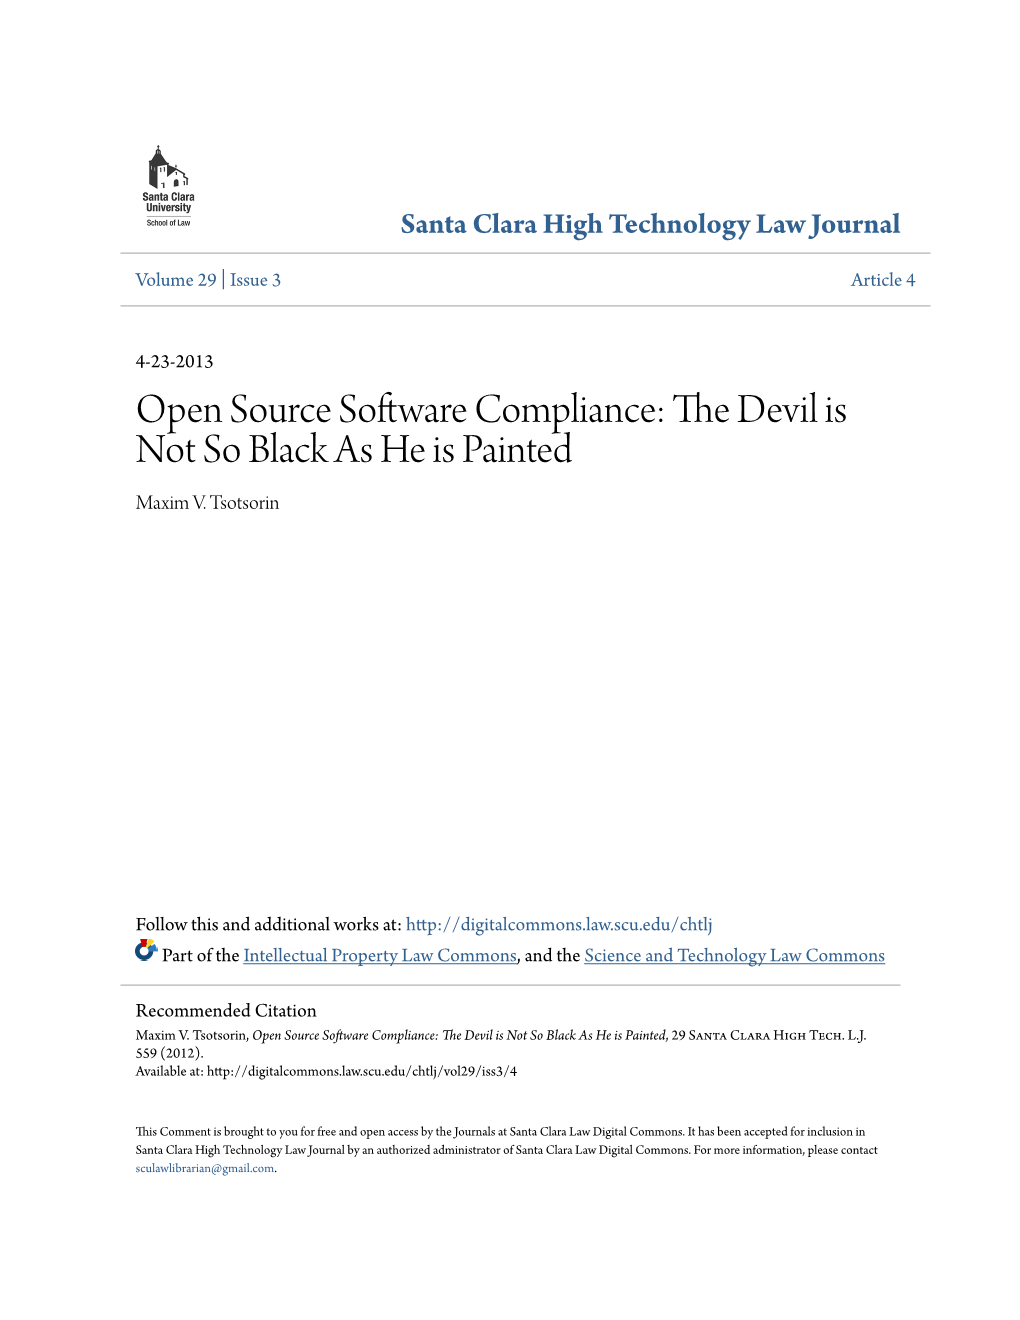 Open Source Software Compliance: the Evd Il Is Not So Black As He Is Painted Maxim V